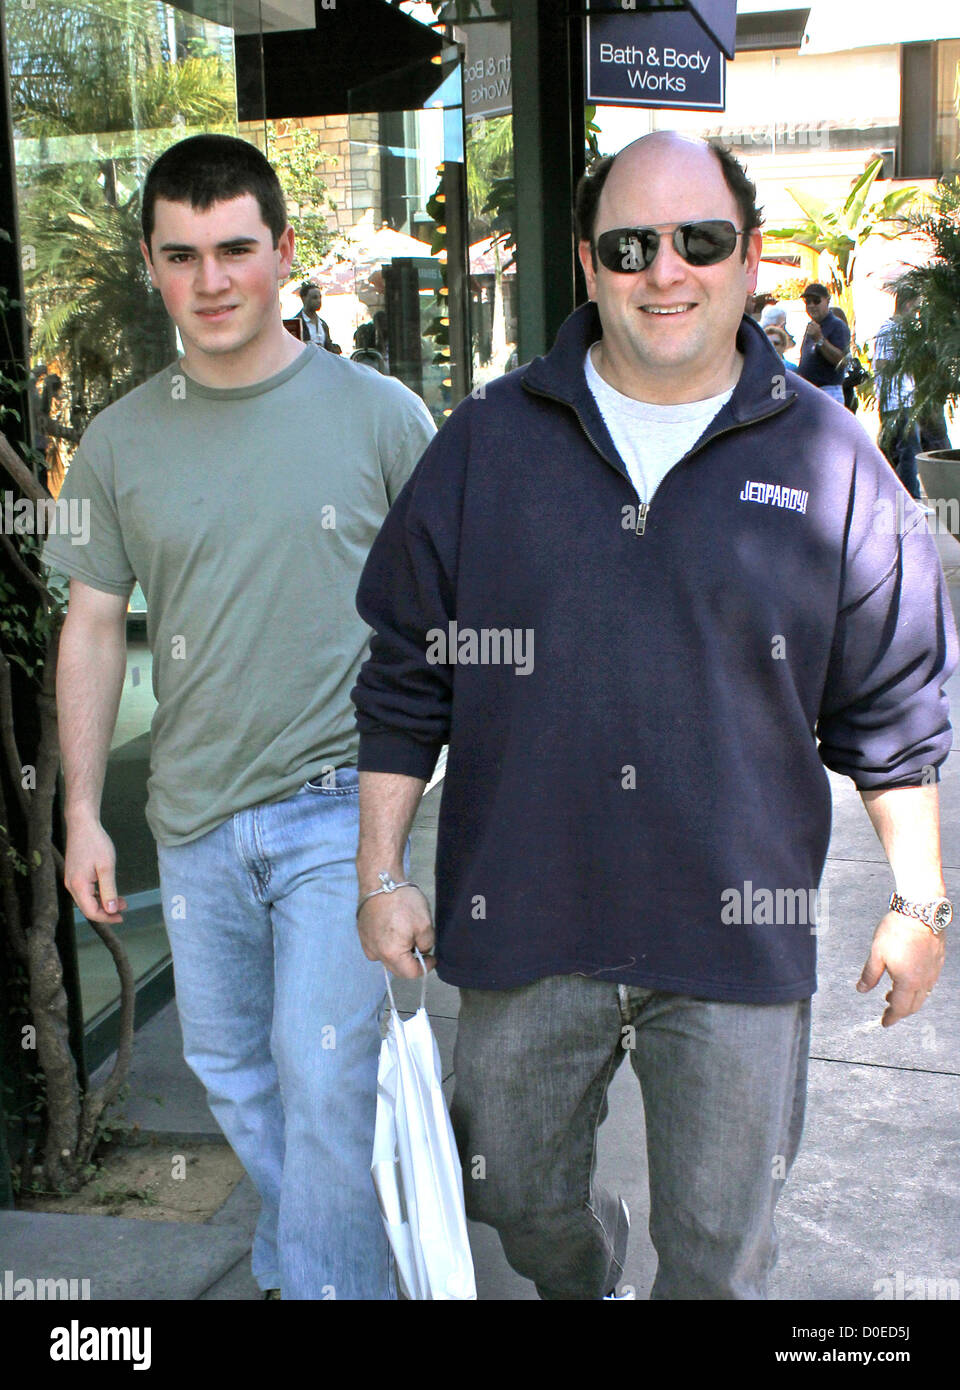 Jason Alexander and his son shopping in West Hollywood Los Angeles, California - 31.10.10 Stock Photo